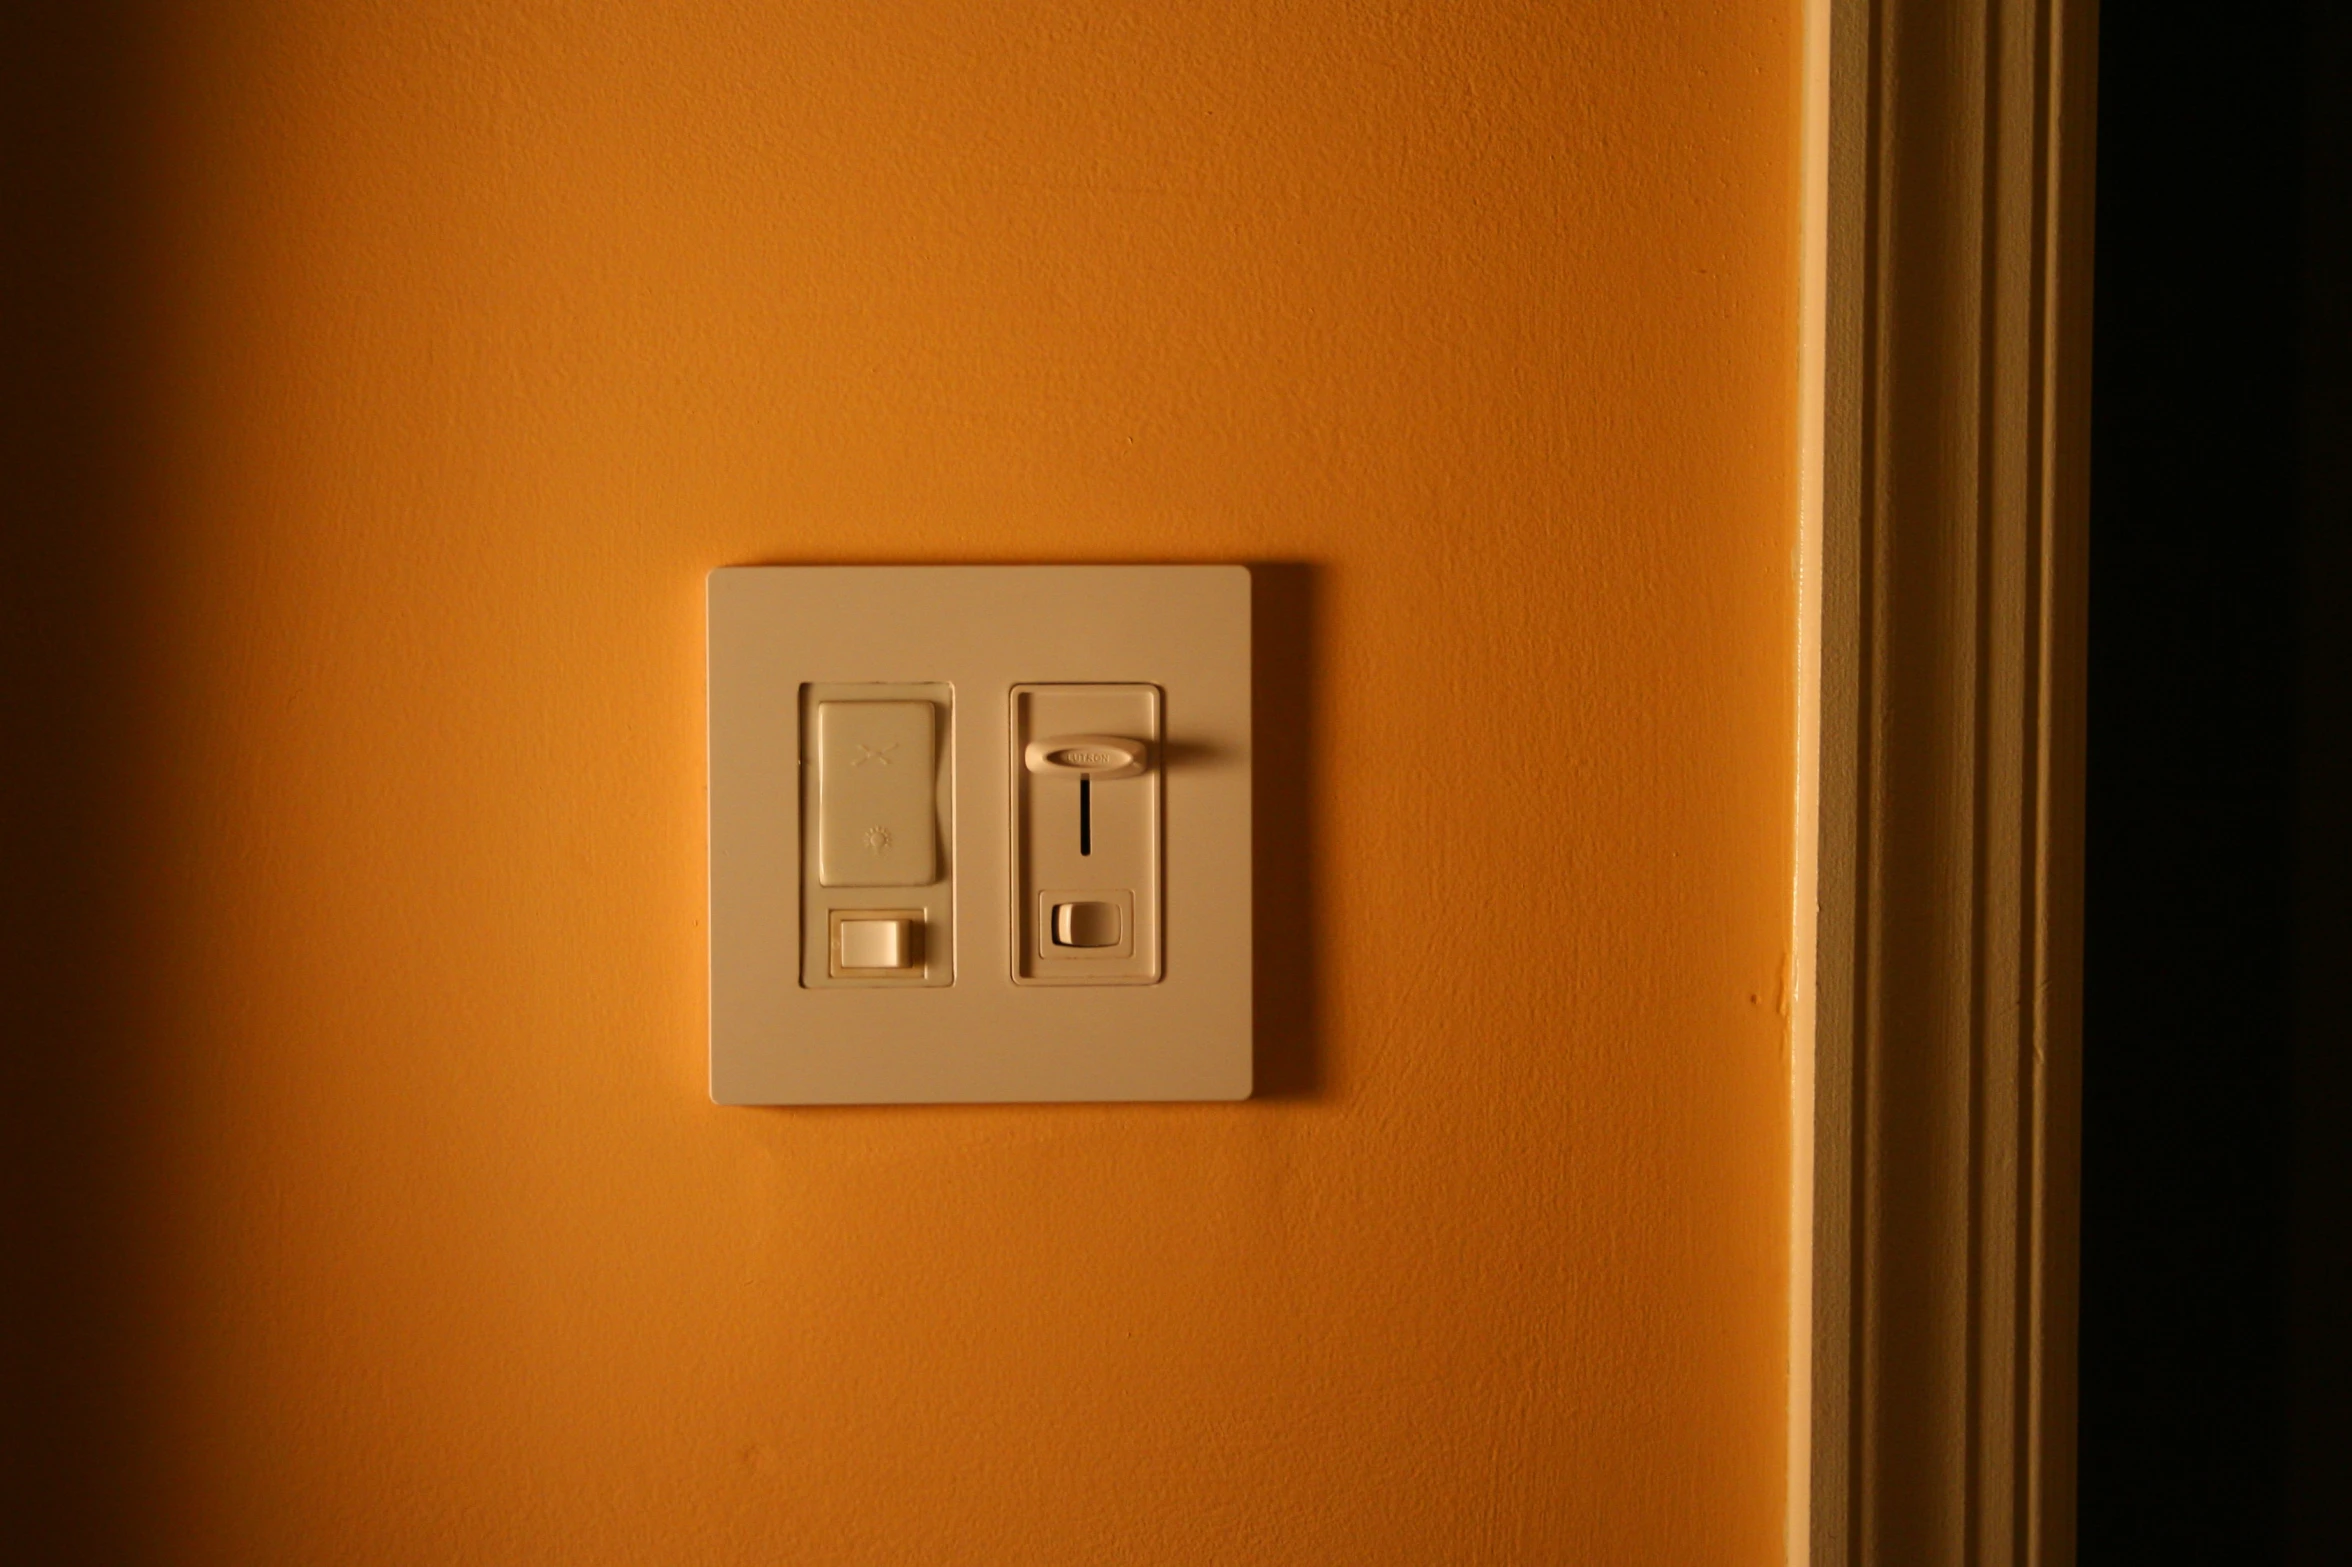 the light switch is on in the room